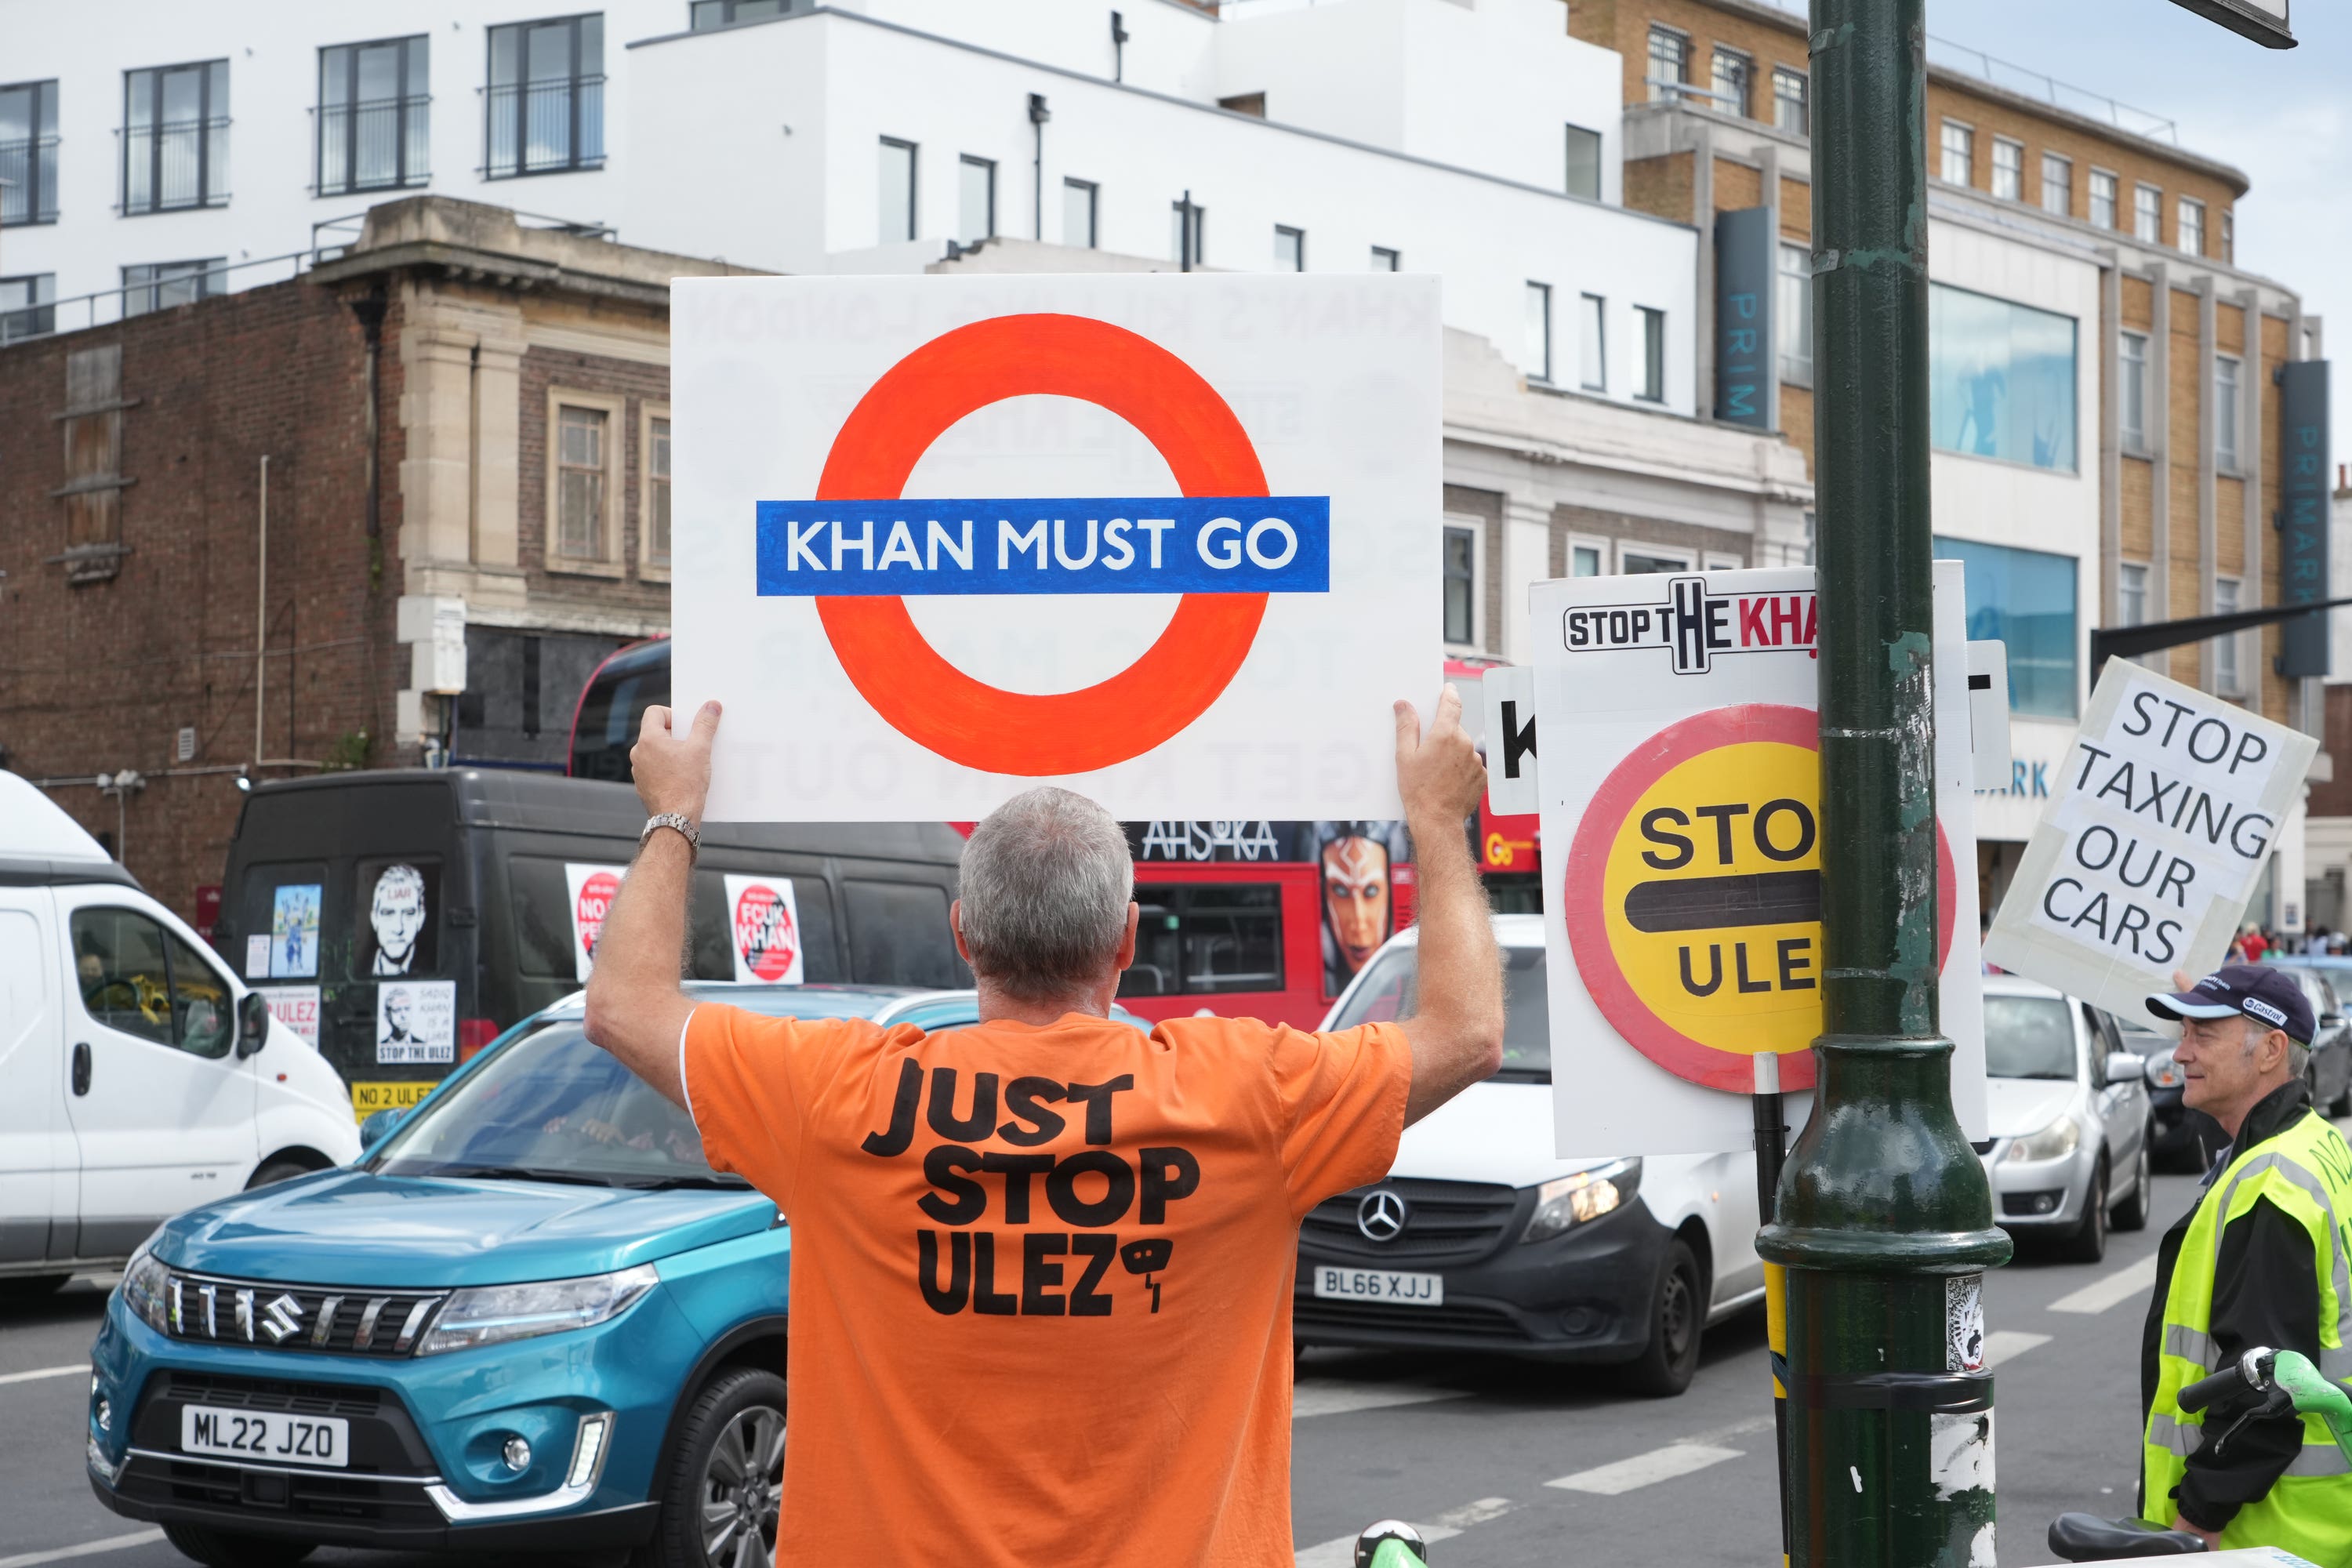 People take part in a protest against the proposed ultra-low emission zone (Ulez) expansion in Tooting, London (Jeff Moore/PA)